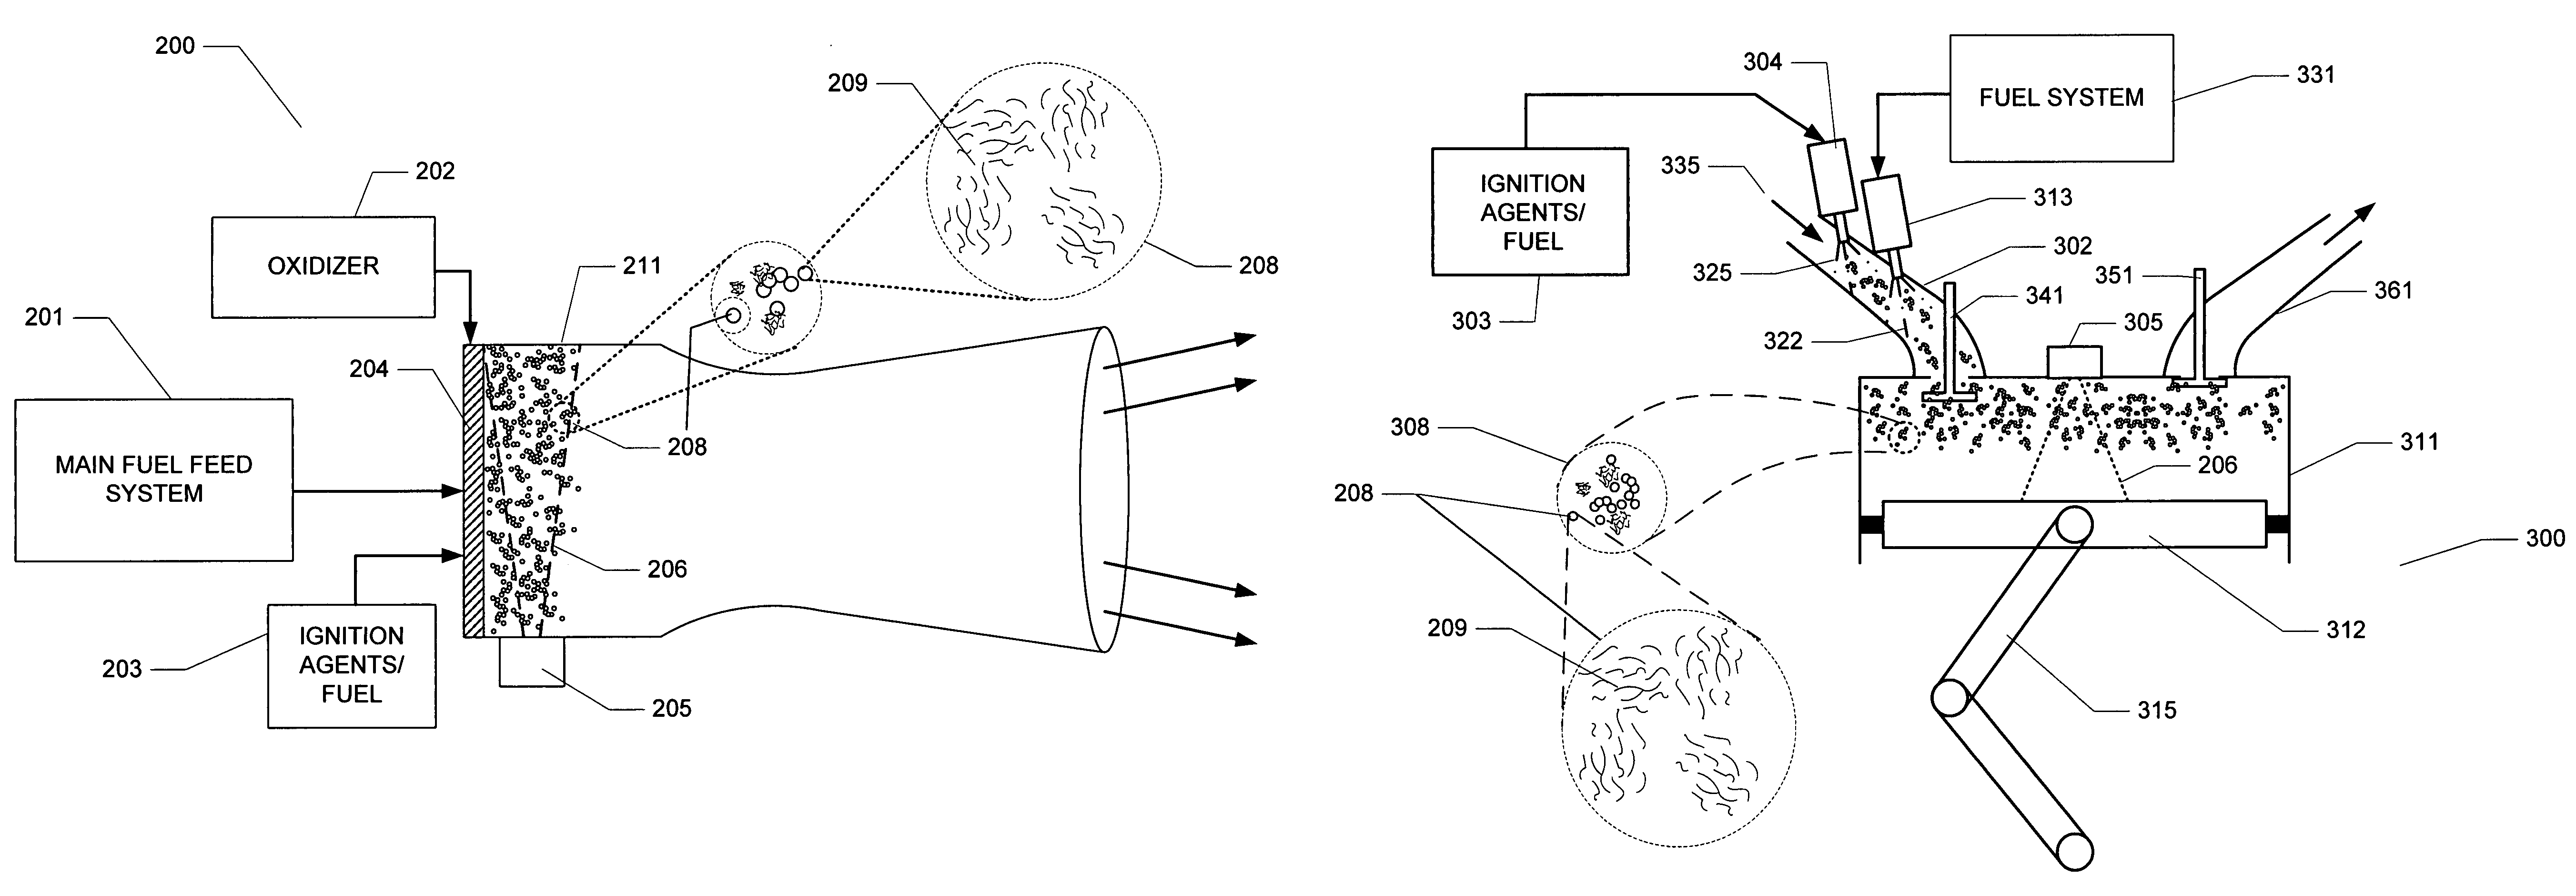 Method for distributed ignition of fuels by light sources